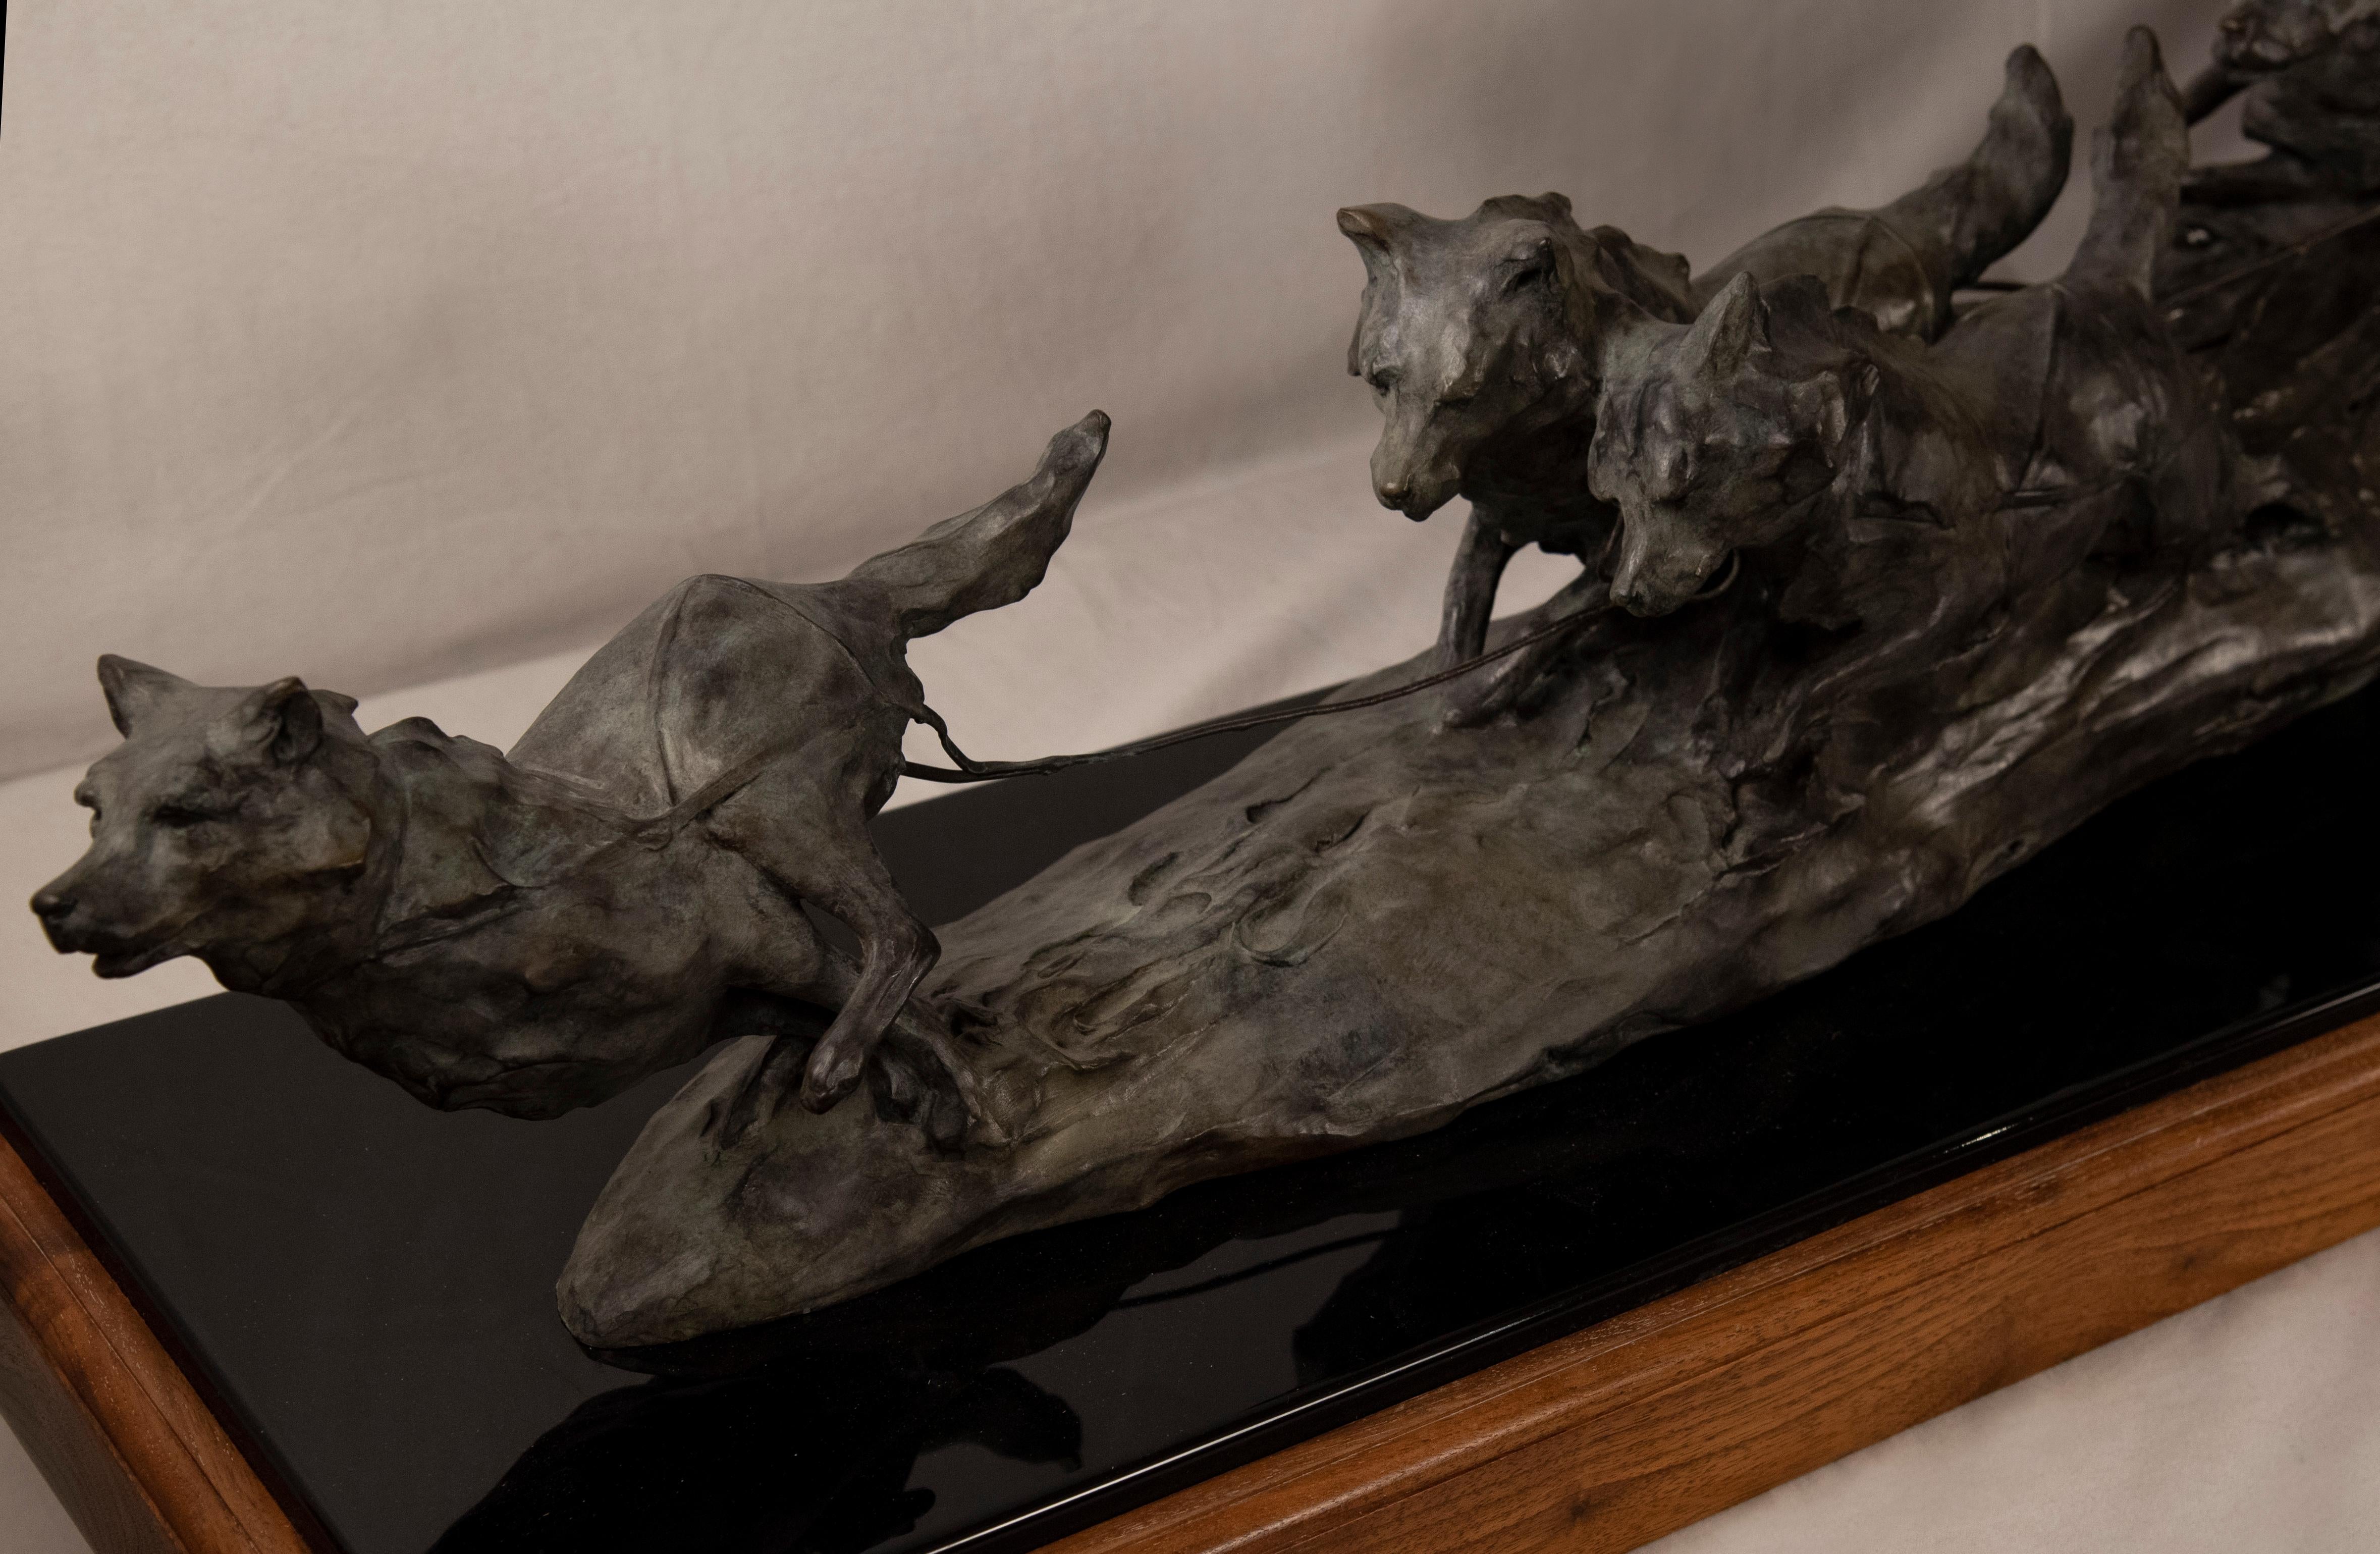 American, b. 1941
Wildlife sculptor Sherry Salari Sander grew up in Northern California and began art training as a potter. She has since solidified a reputation as a wildlife sculptor, known for expressive portrayals in bronze. Sander lives near